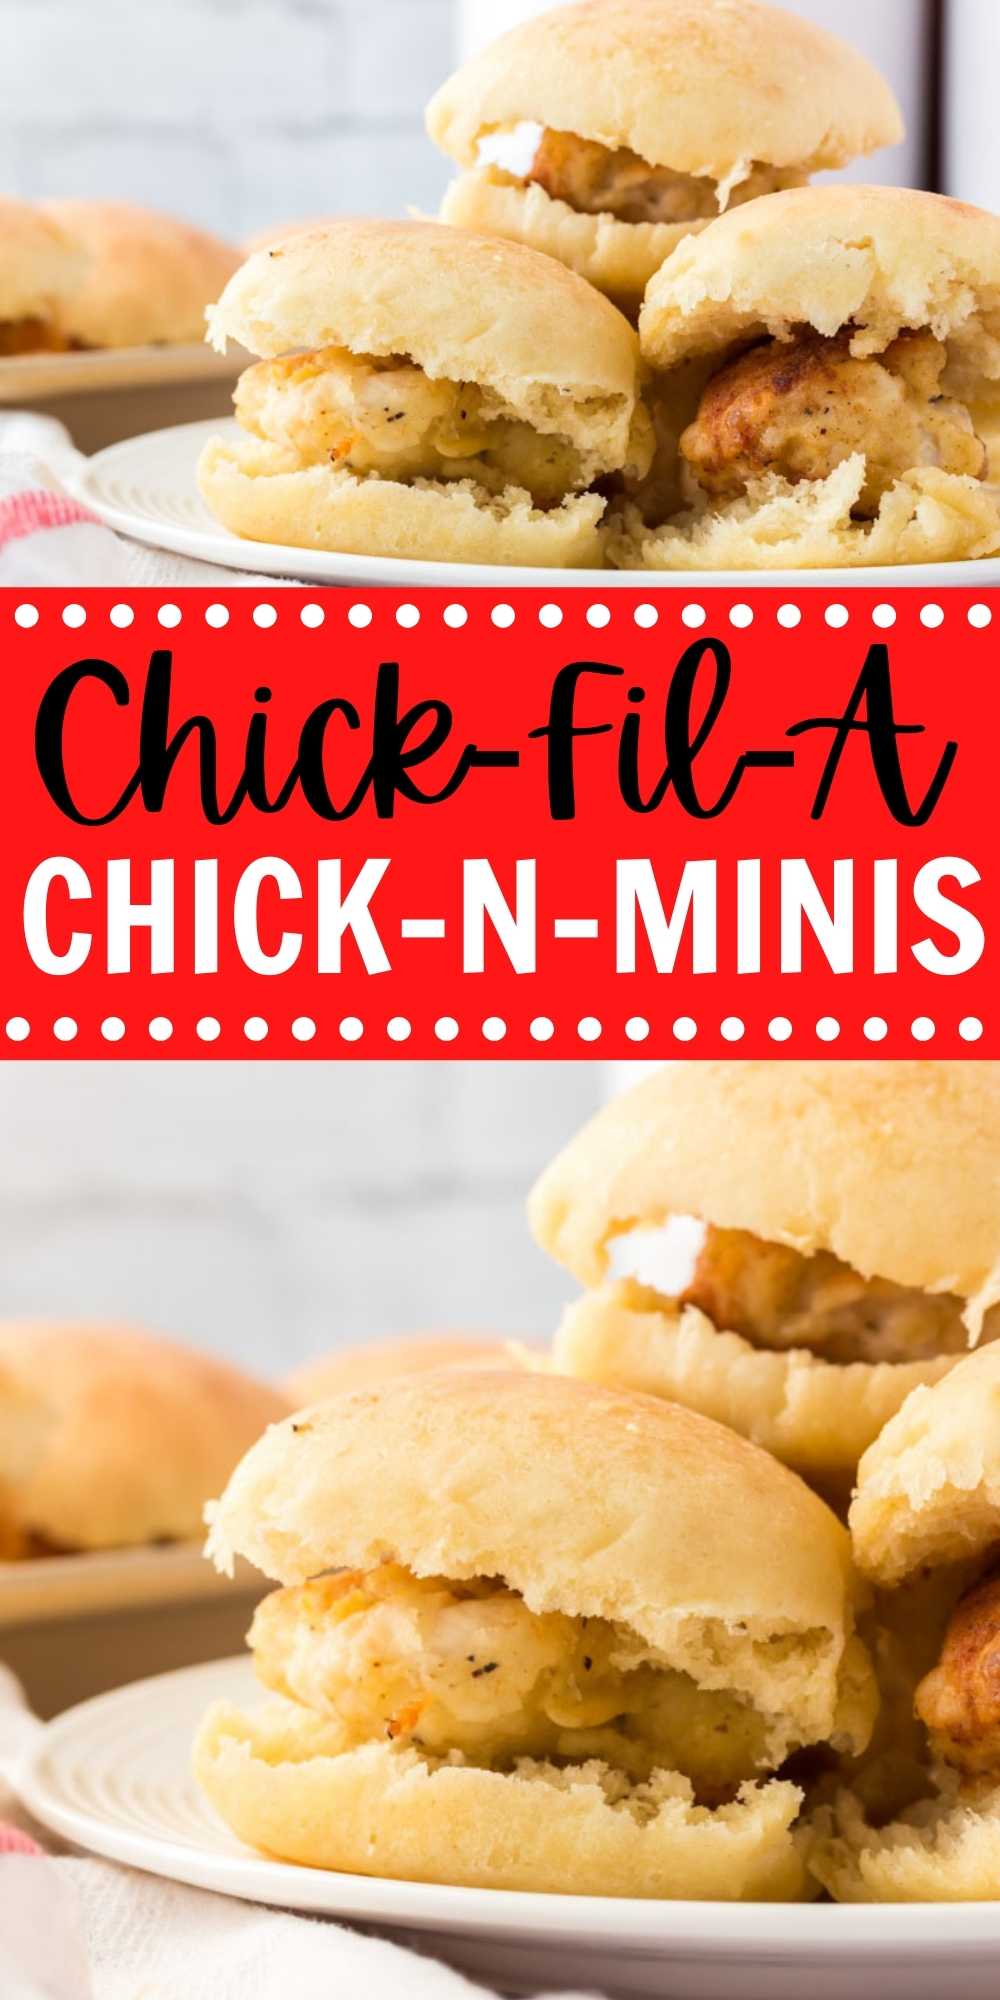 Learn how to make Chick-fil-a chick n minis at home with this super easy recipe!  These little chicken sandwiches are prefect for breakfast or lunch. Copycat Chick-Fil-A is easier to make at home than you think with this simple recipe. #eatingonadime #copycatrecipes #chickfilarecipes #breakfastrecipes 